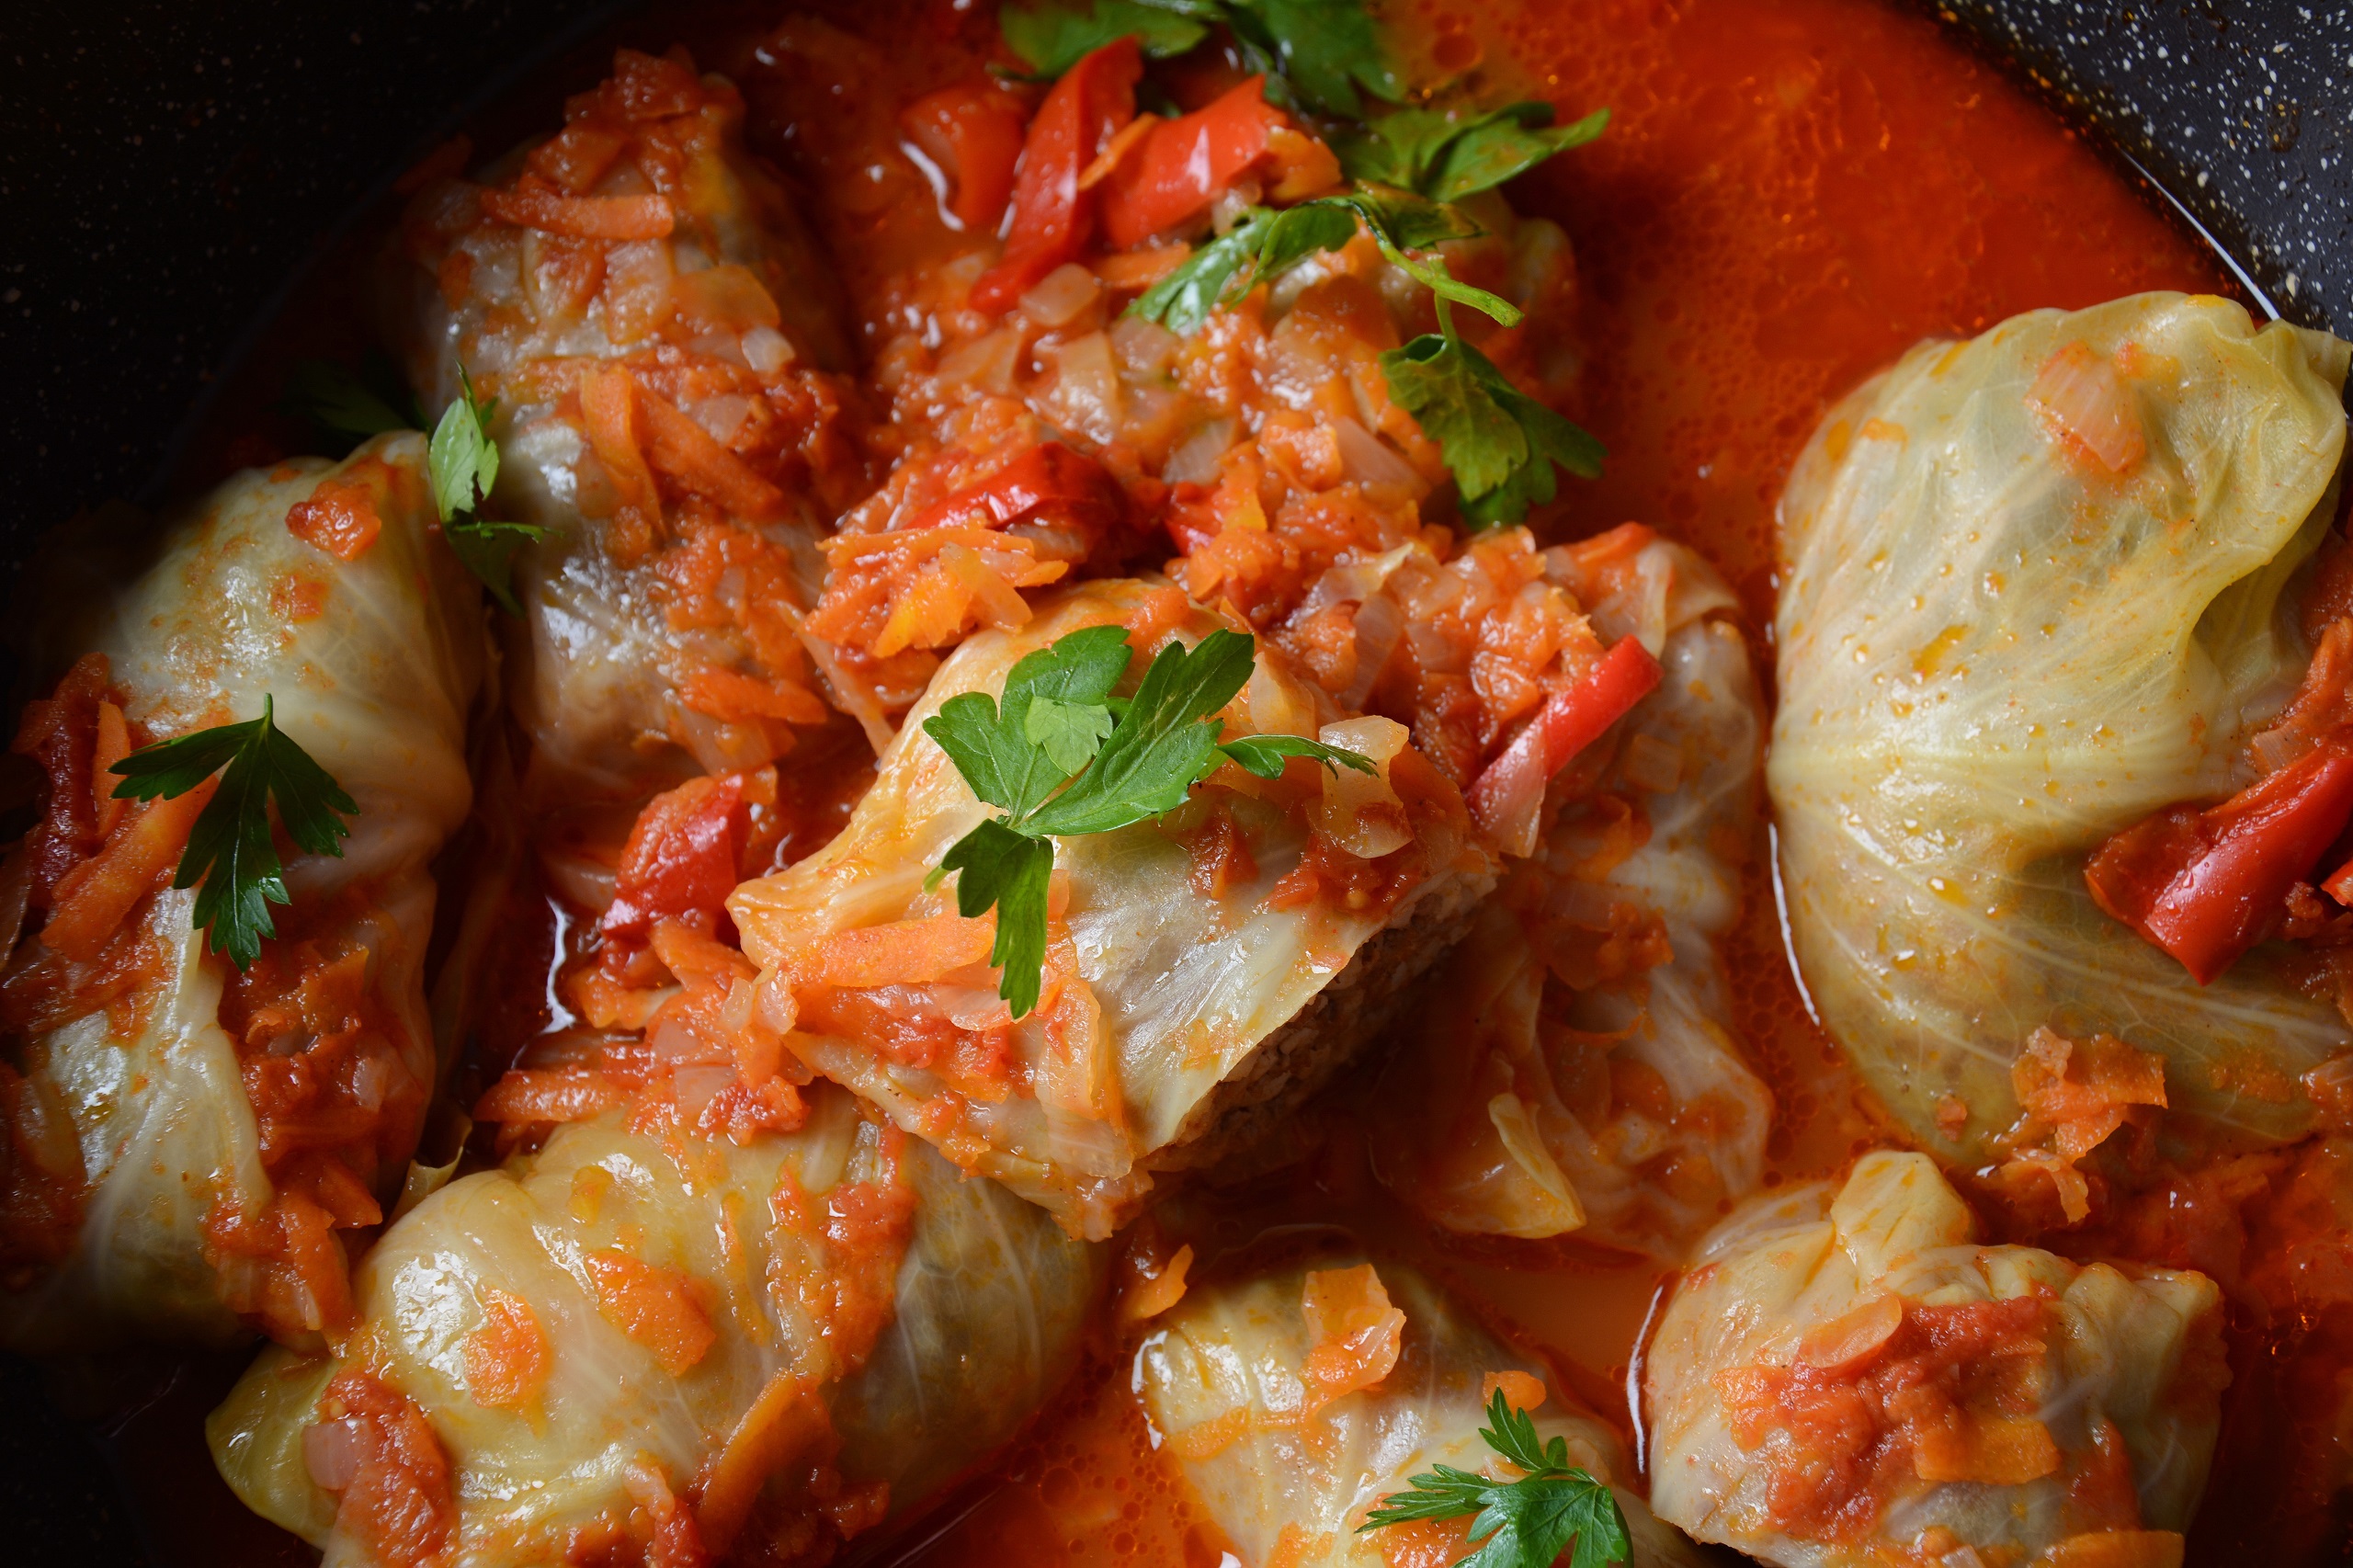 Close up of stuffed cabbage rolls smothered in chunky light tomato sauce with carrot shreds garnished with parsley still in their juices from when cooked in an iron skillet.